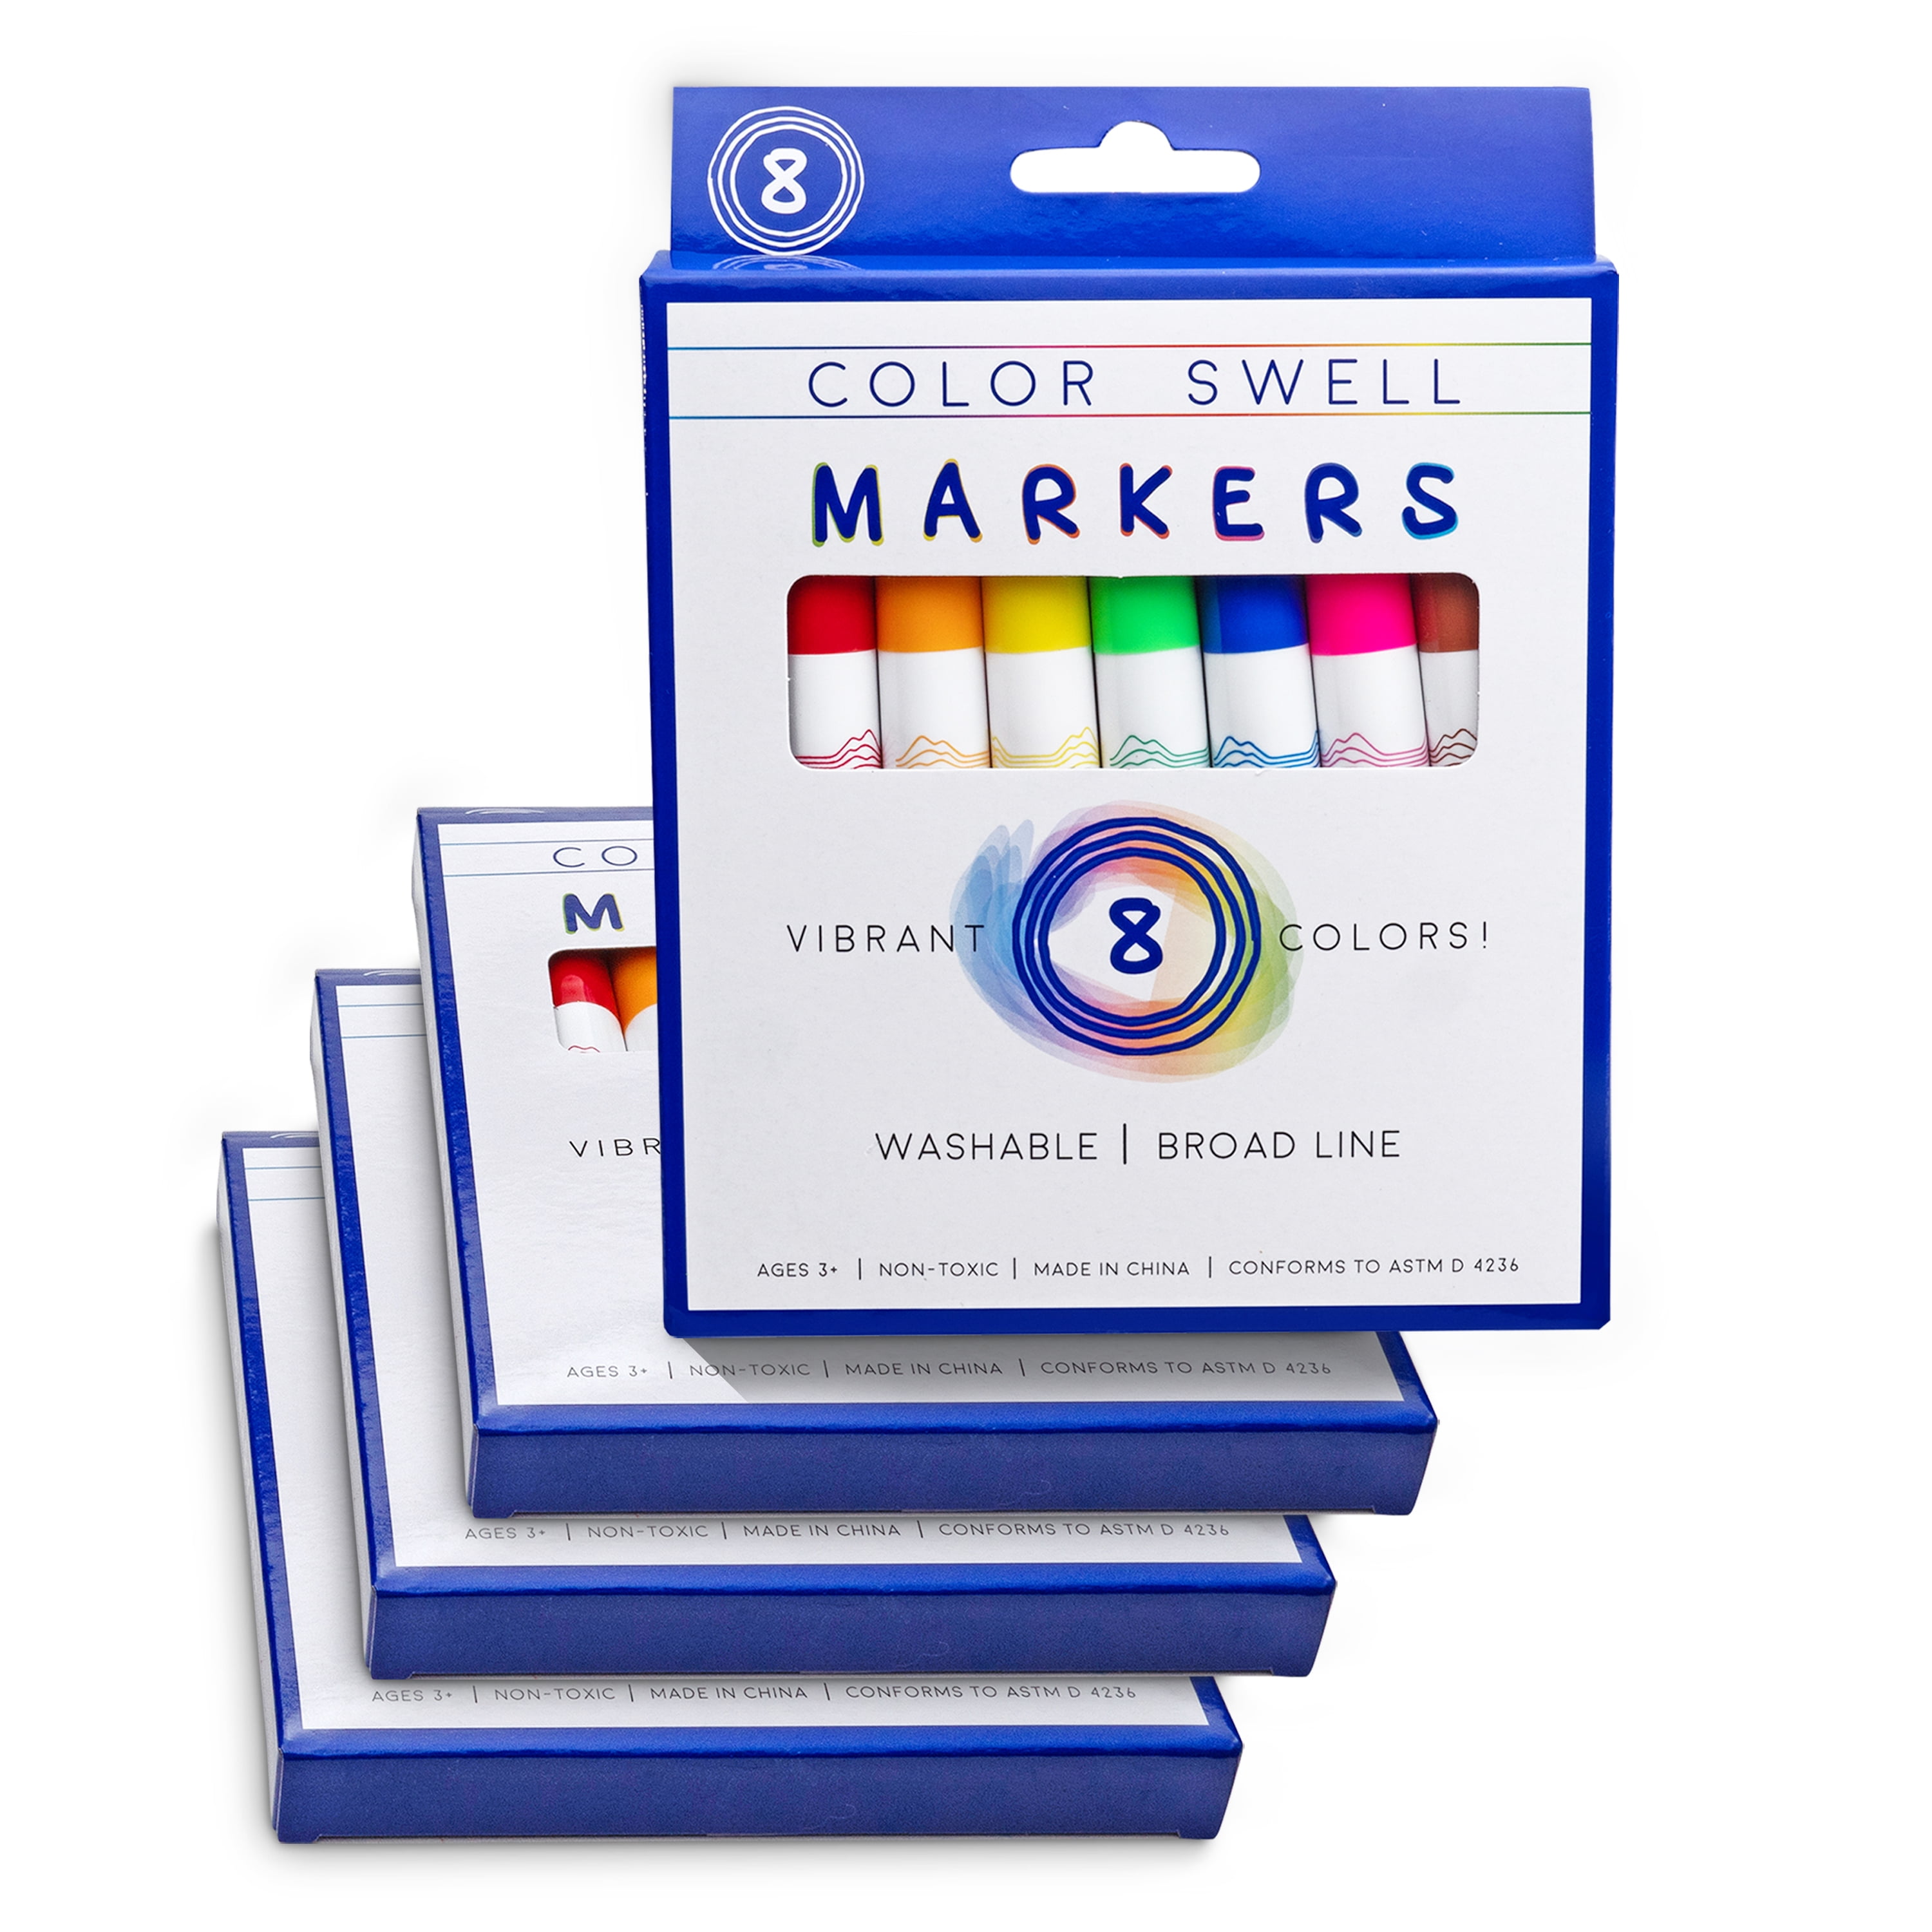 Color Swell Bulk Permanent Markers 60 Count (Black) for Teachers, Offices, Classrooms